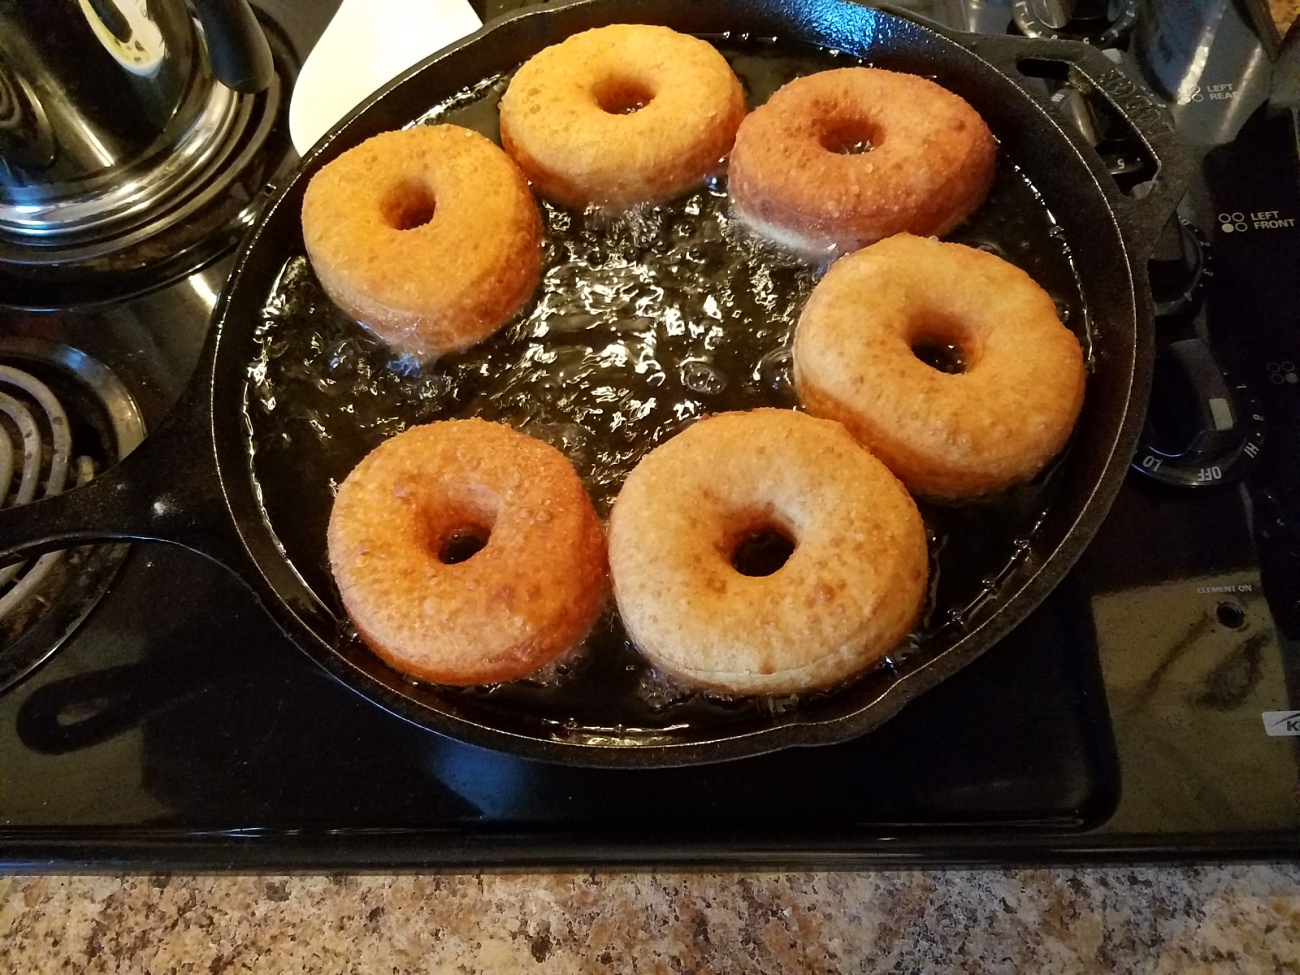 homemade doughnuts being fried up in a cast iron skillet.